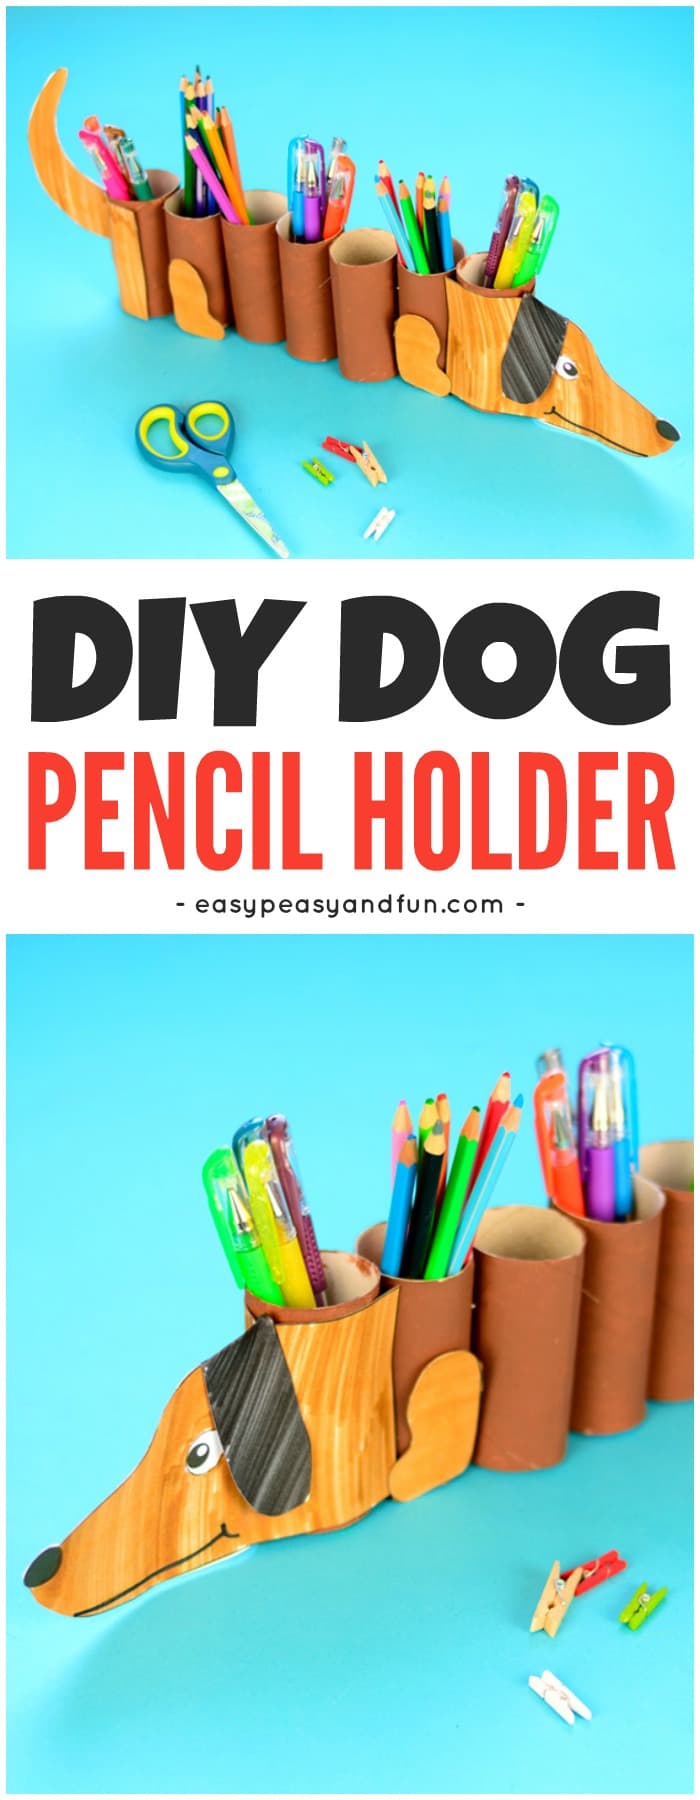 DIY paper roll dog pencil holder craft with dog template, suitable for children